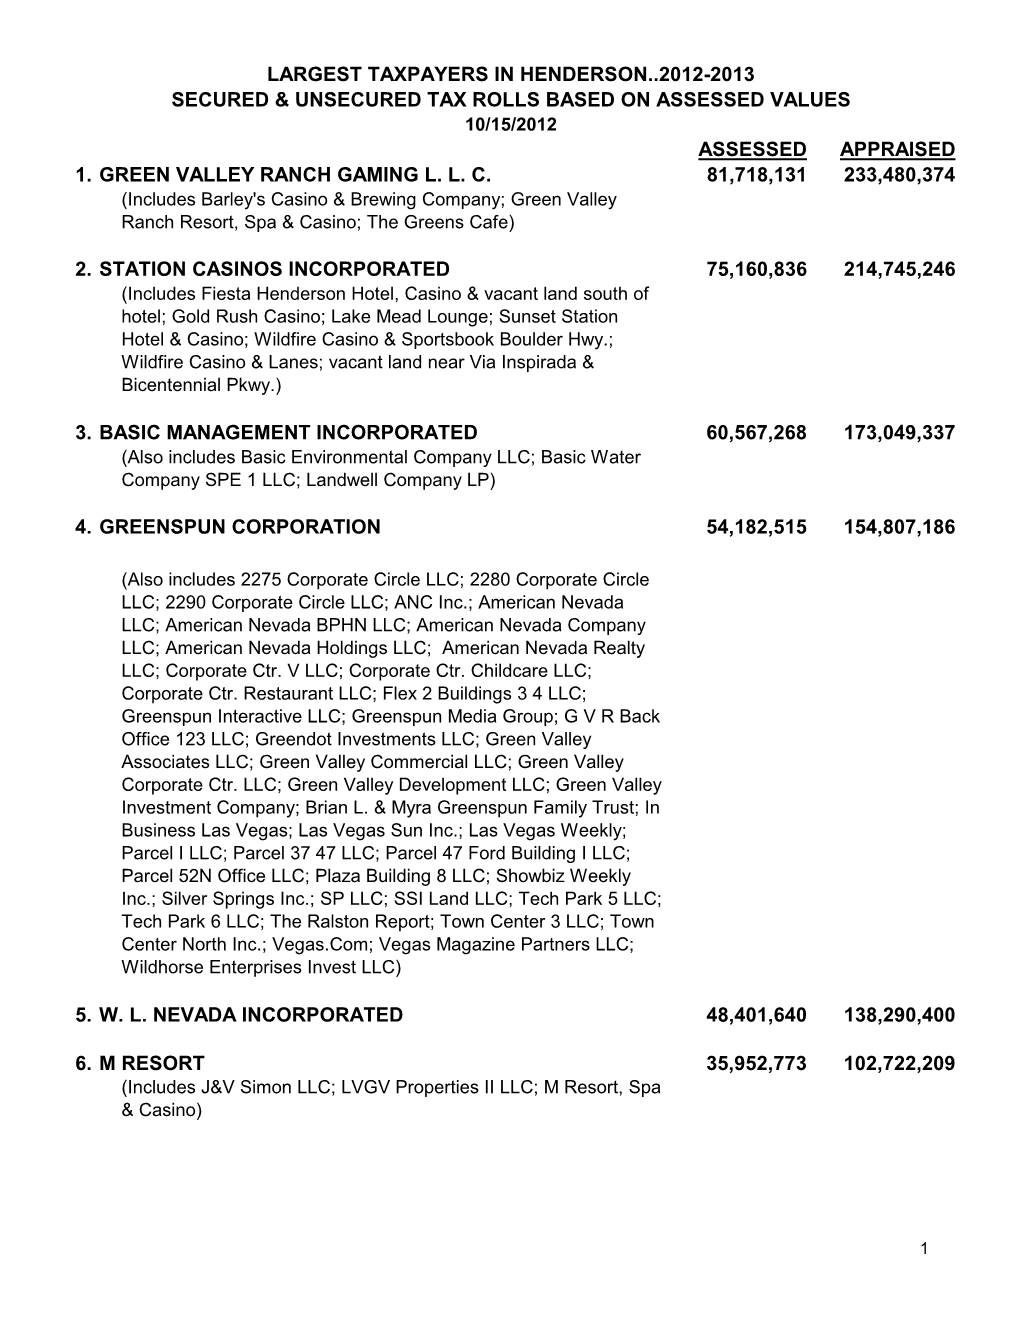 Assessed Appraised 1. Green Valley Ranch Gaming L. L. C